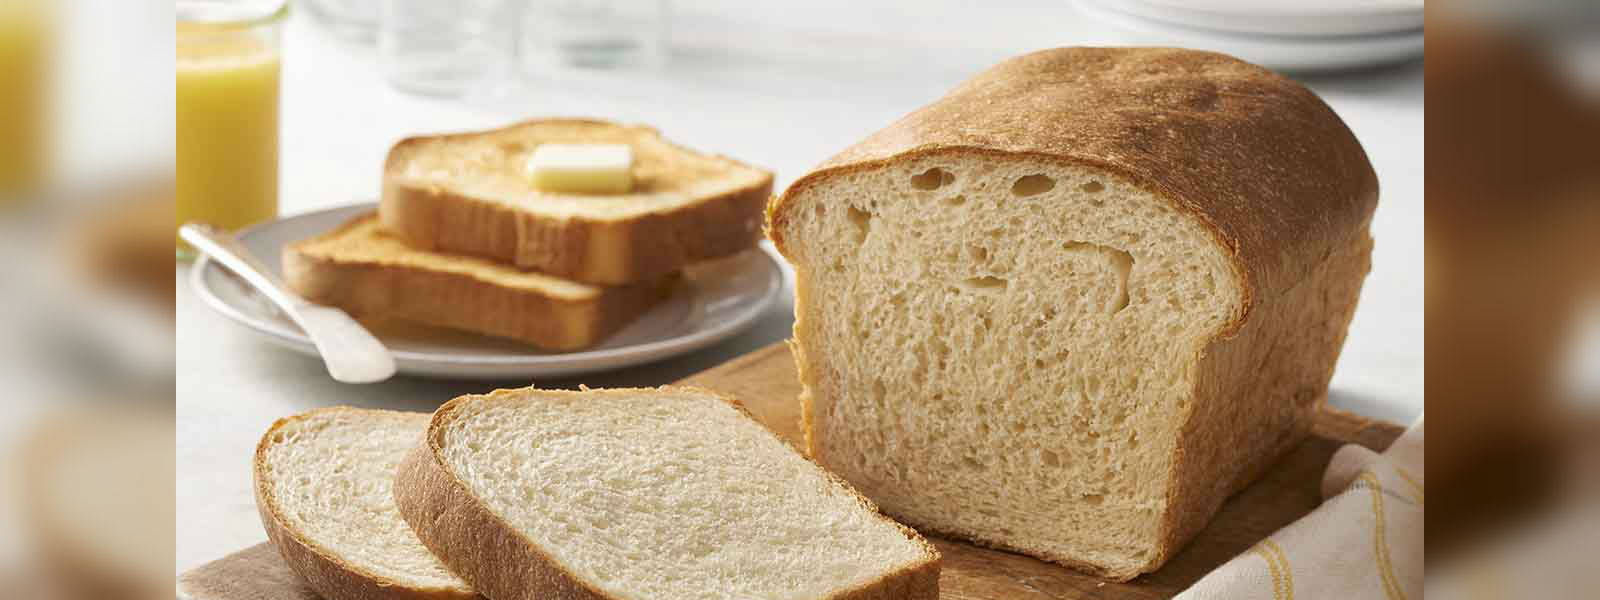 Flour increased by Rs 5.50 per kilo; Bread increased by Rs 2 per loaf